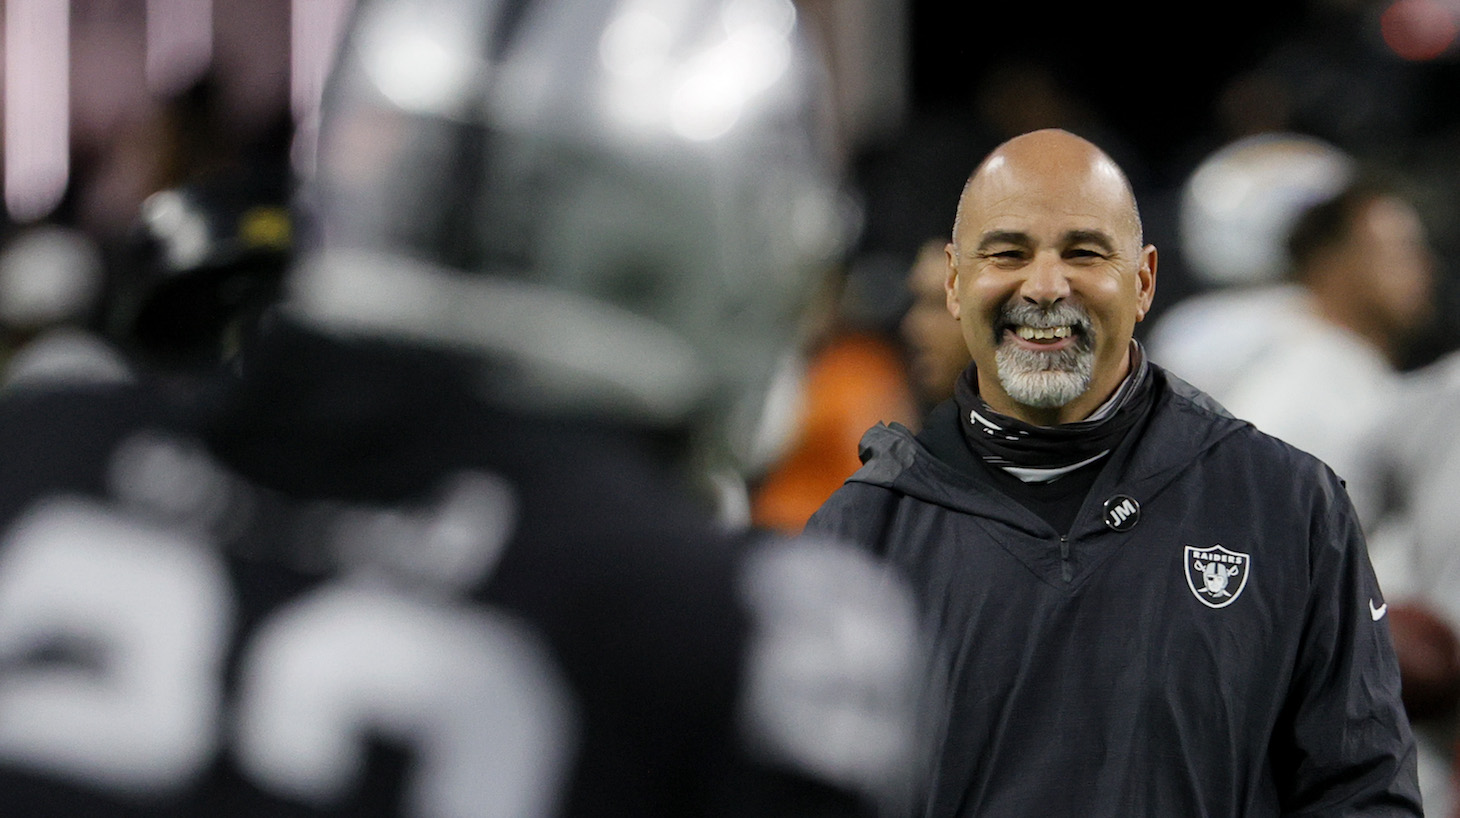 LAS VEGAS, NEVADA - JANUARY 09: Interim head coach/special teams coordinator Rich Bisaccia of the Las Vegas Raiders smiles as the team warms up before their game against the Los Angeles Chargers at Allegiant Stadium on January 9, 2022 in Las Vegas, Nevada. The Raiders defeated the Chargers 35-32 in overtime. (Photo by Ethan Miller/Getty Images)